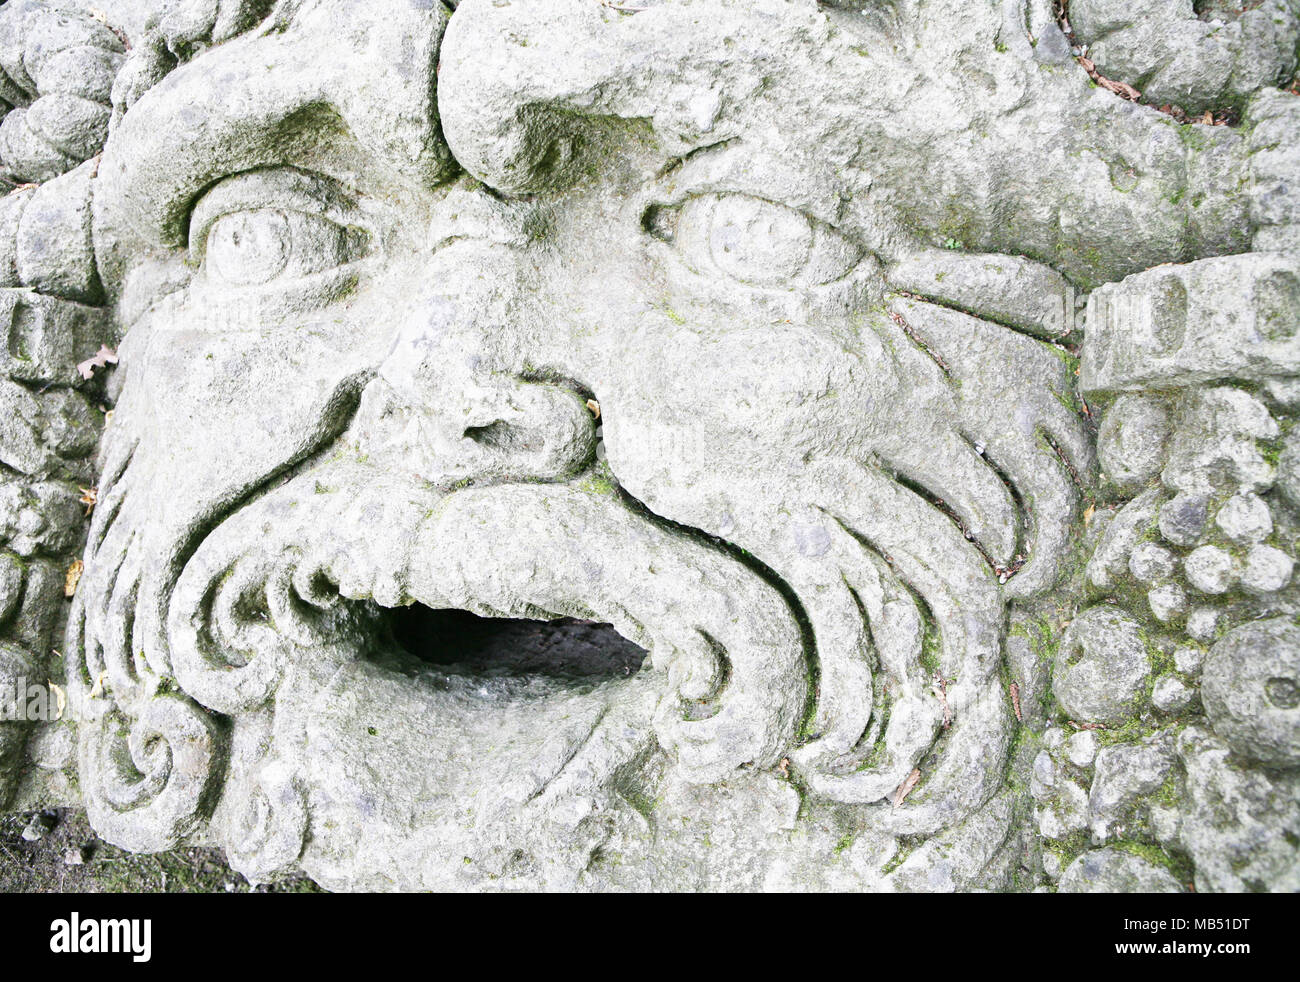 Giant head statue at Monster Park, Bomarzo, Italy Stock Photo